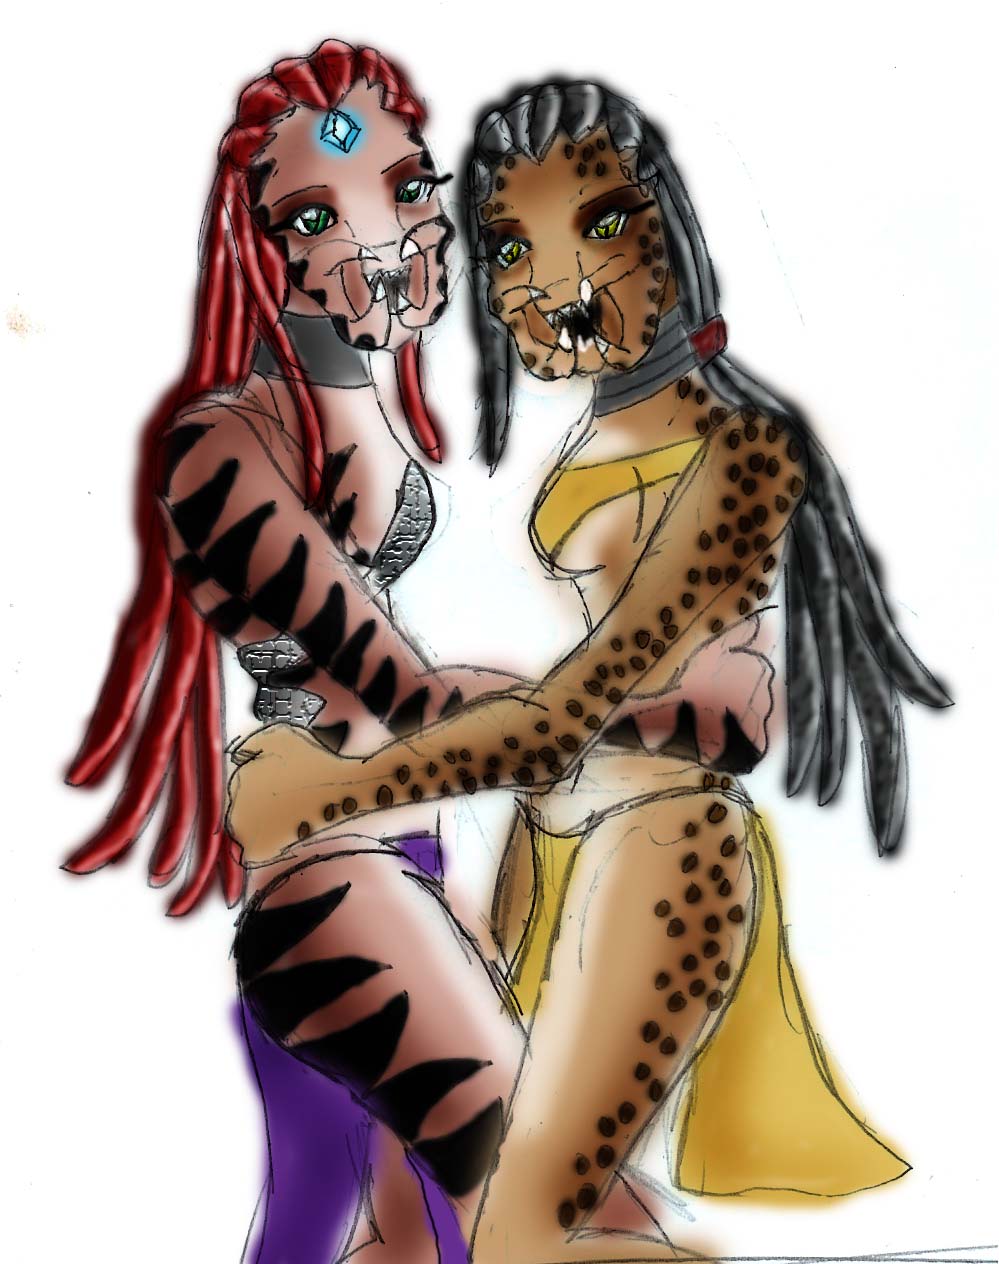 Predator: "Hey mister! We're sisters!" by Deadly_Lycan